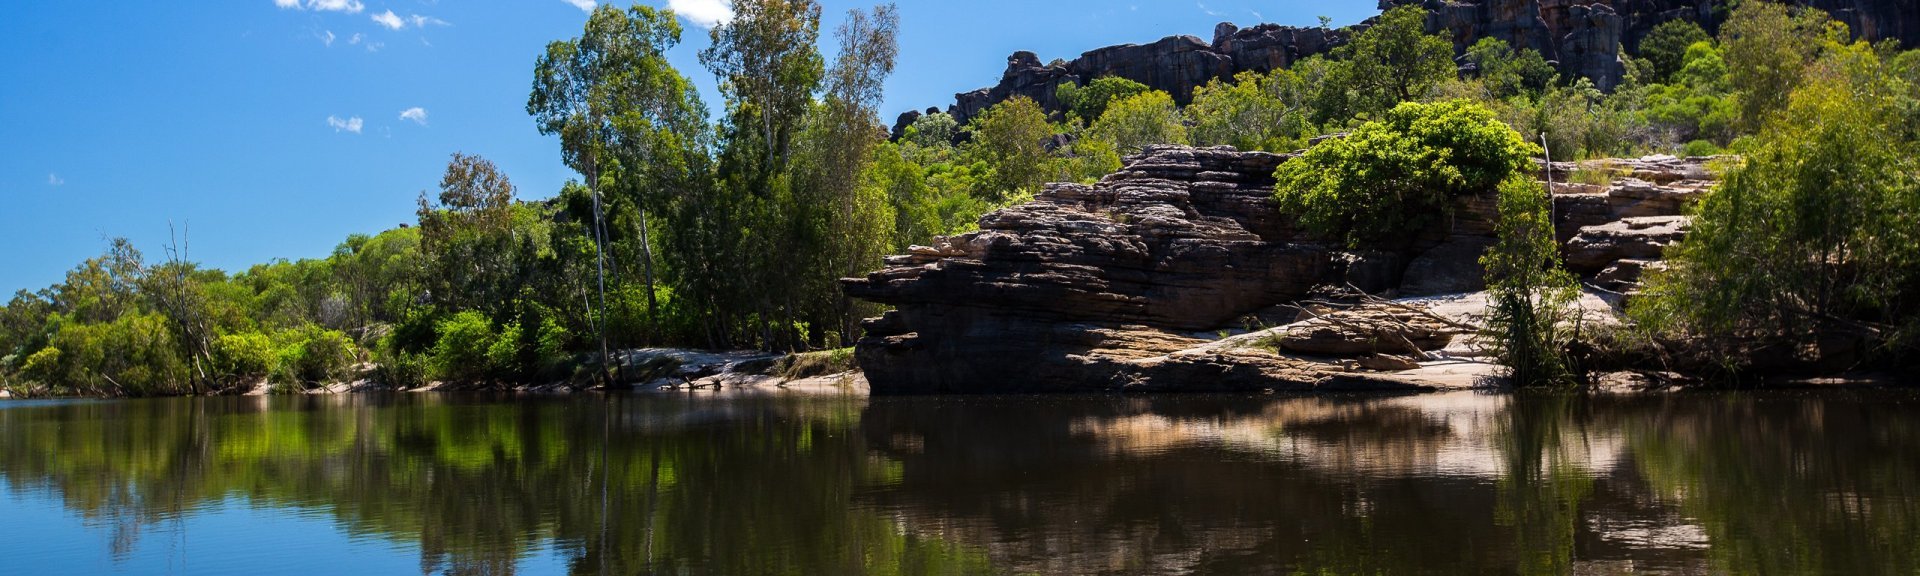 main image for article: The archaeology of Bindjarran rockshelter in Manilikarr Country, Kakadu National Park, Northern Territory